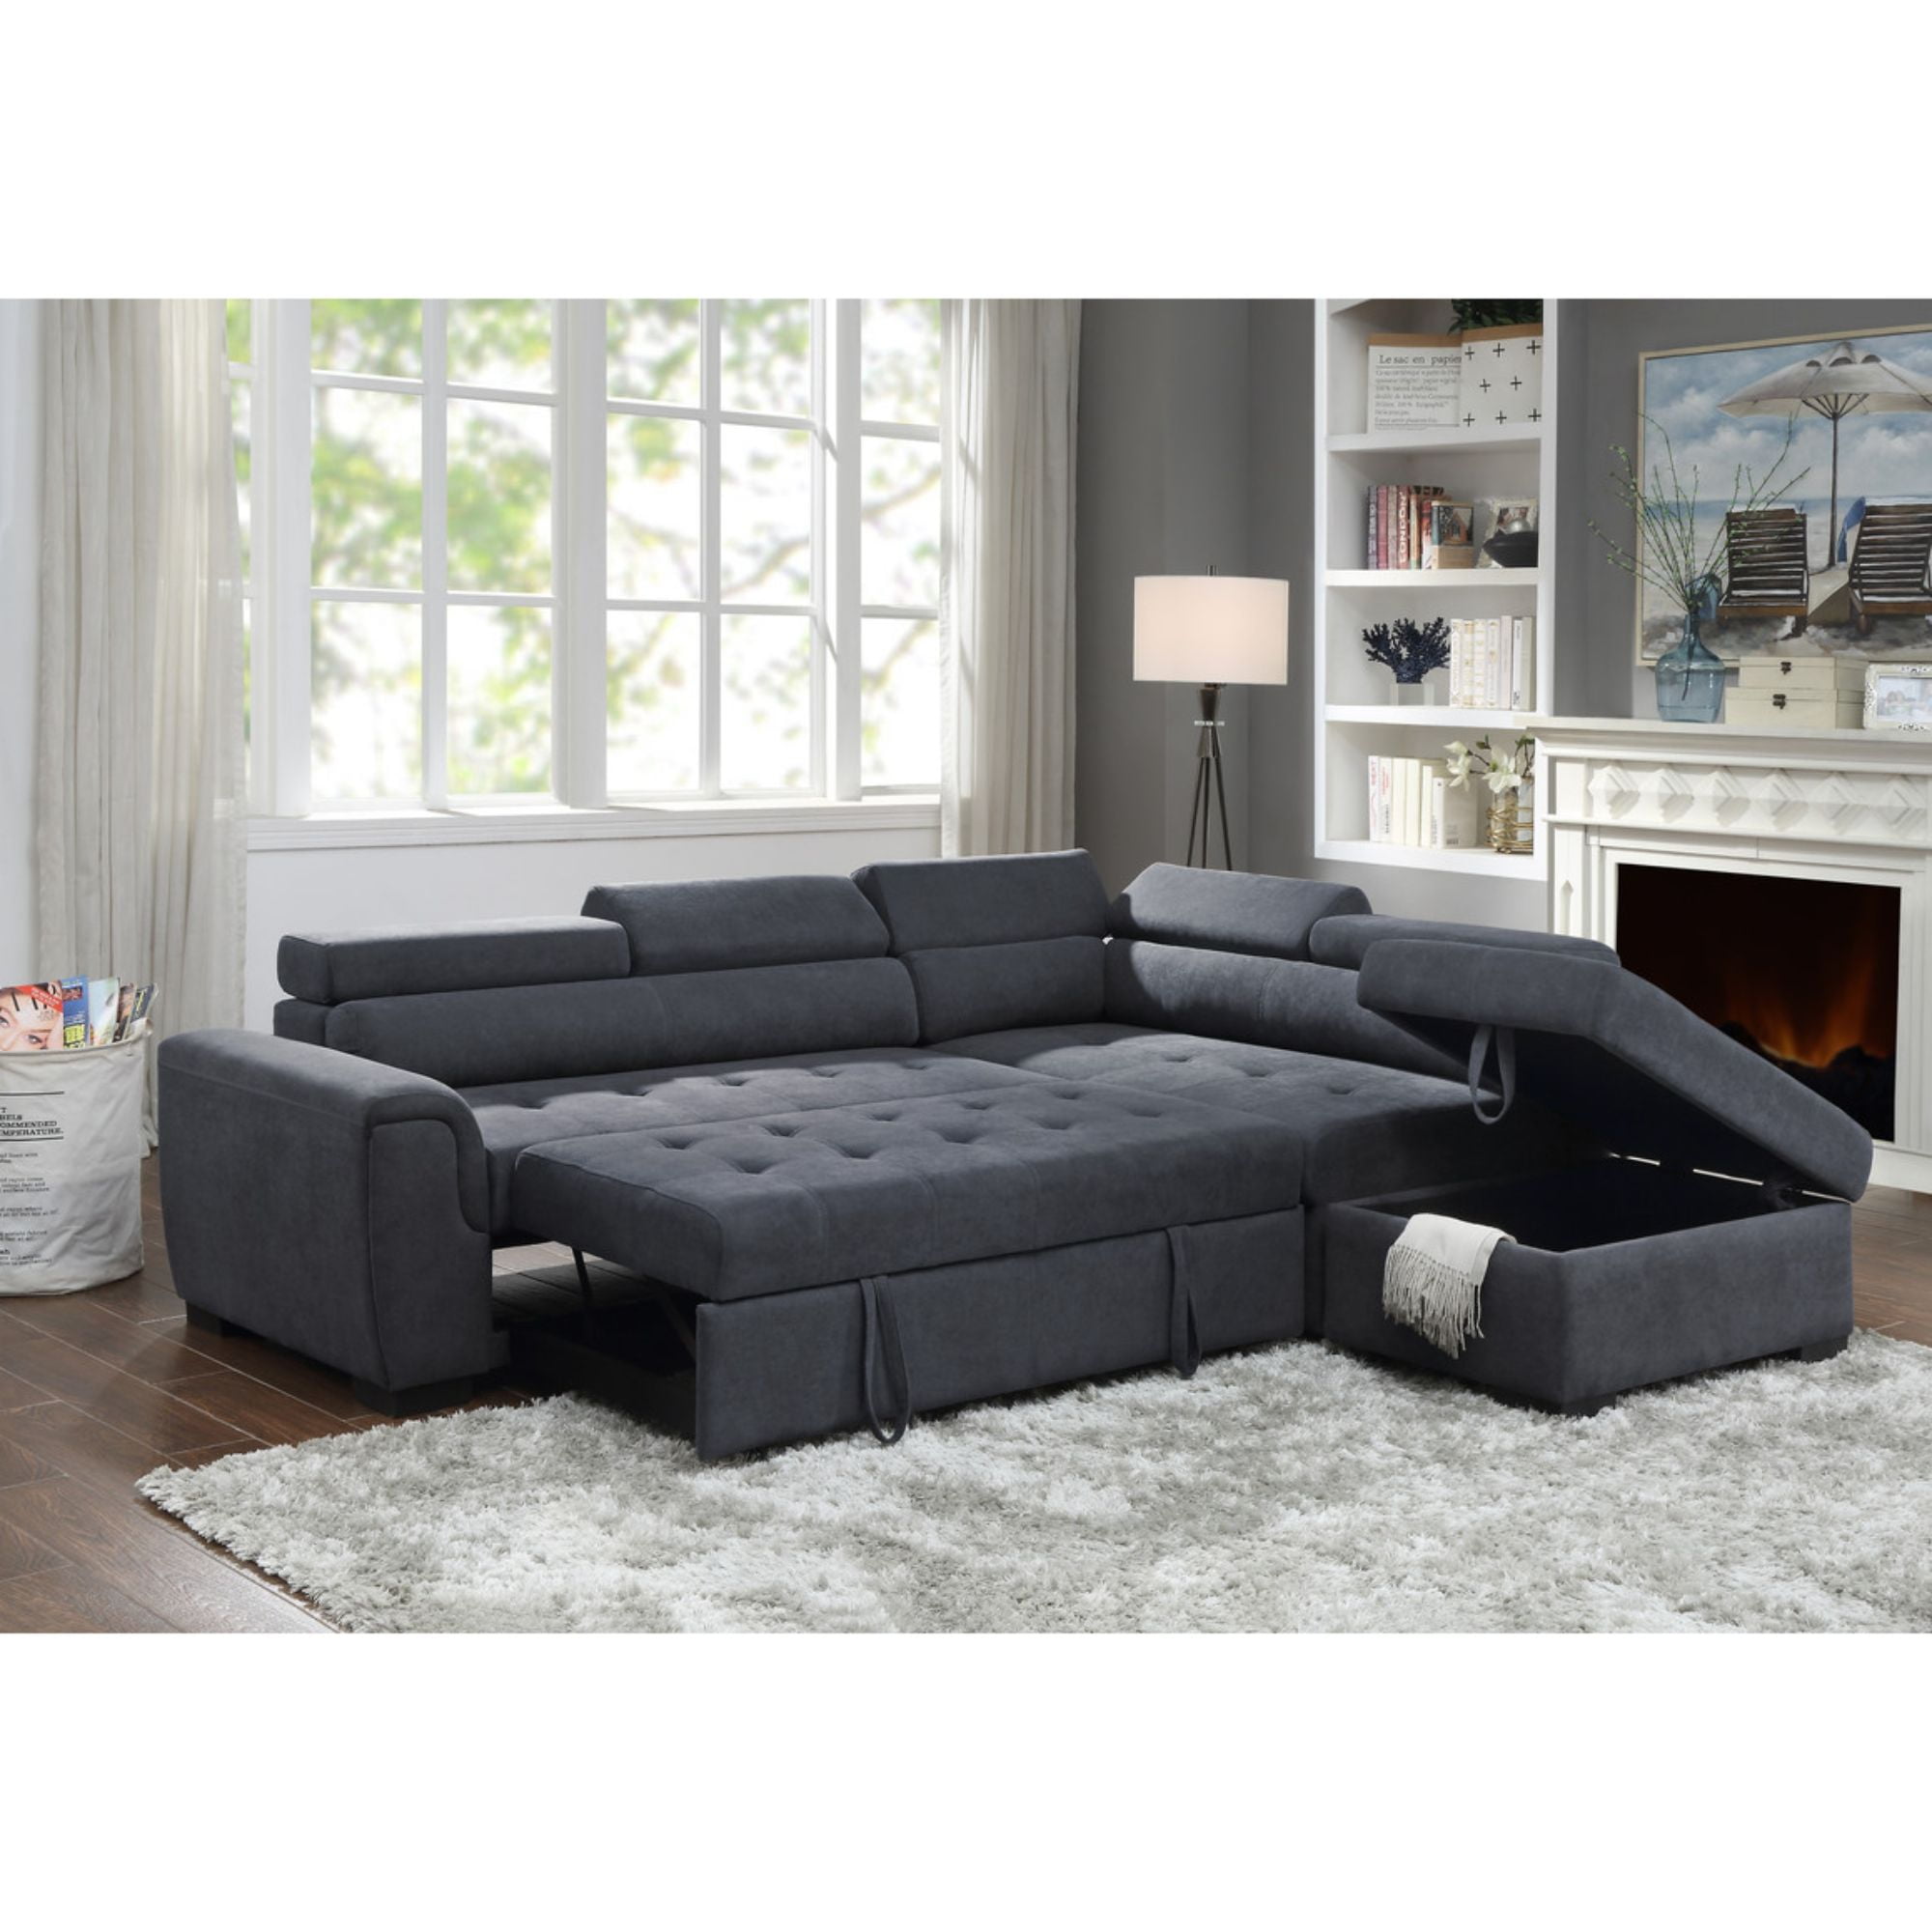 Set Of 5 Lava Gray Haris Fabric Sleeper, Sectional Sofa Set With Pull Out Sleeper Area